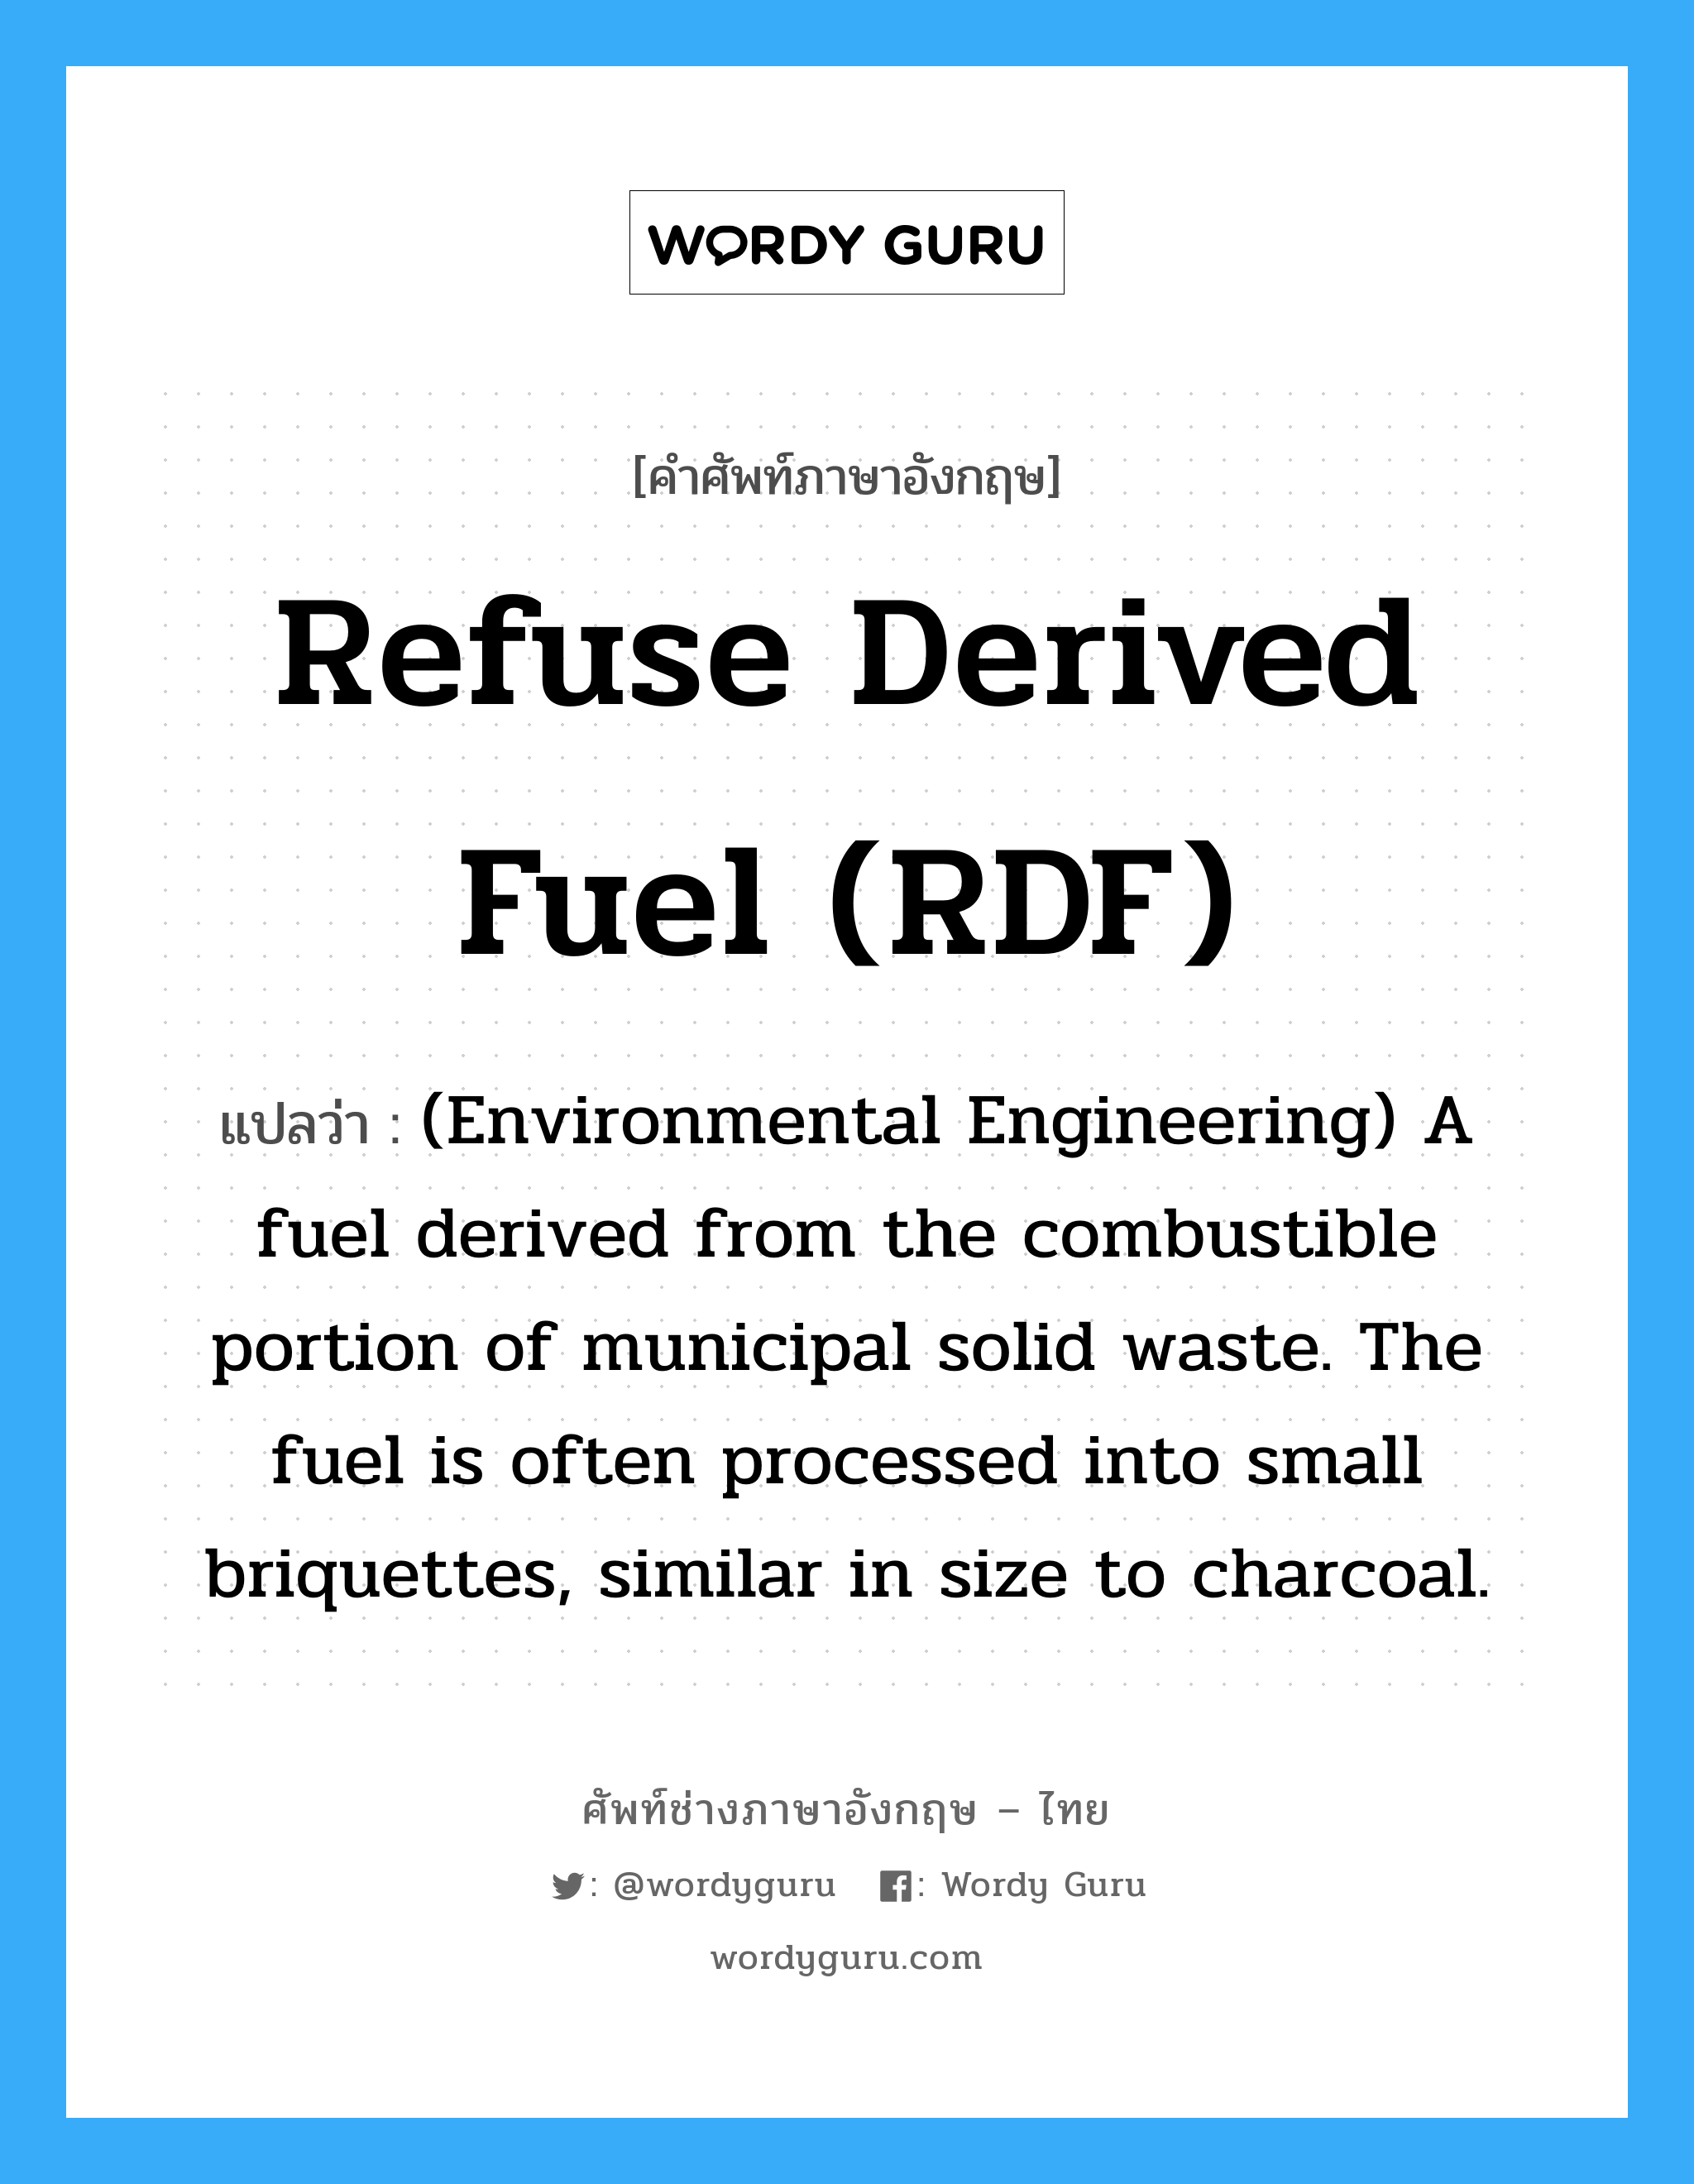 Refuse derived fuel (RDF) แปลว่า?, คำศัพท์ช่างภาษาอังกฤษ - ไทย Refuse derived fuel (RDF) คำศัพท์ภาษาอังกฤษ Refuse derived fuel (RDF) แปลว่า (Environmental Engineering) A fuel derived from the combustible portion of municipal solid waste. The fuel is often processed into small briquettes, similar in size to charcoal.